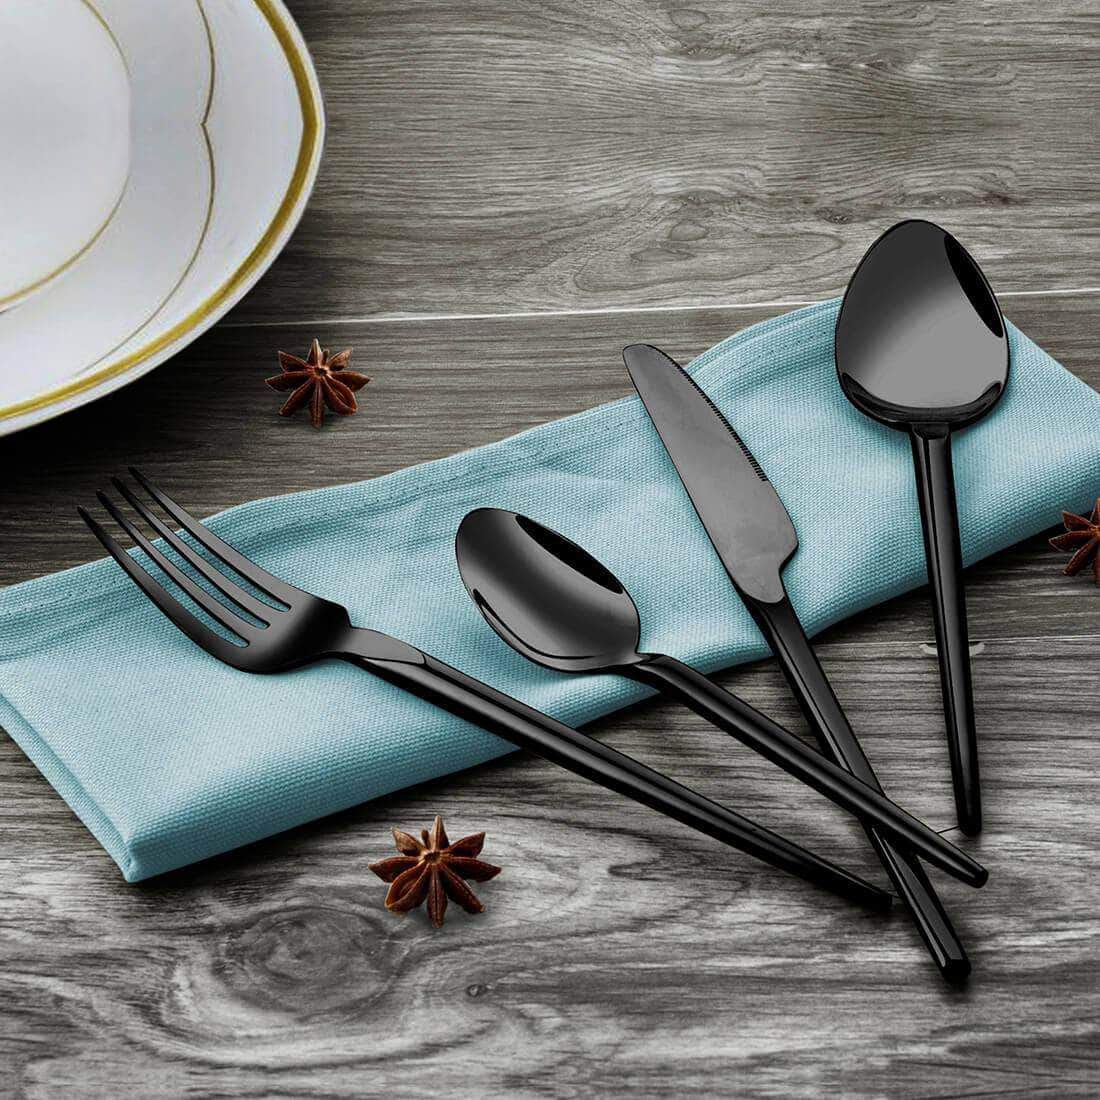 Dining Etiquette: Know Your Cutlery And Napkin